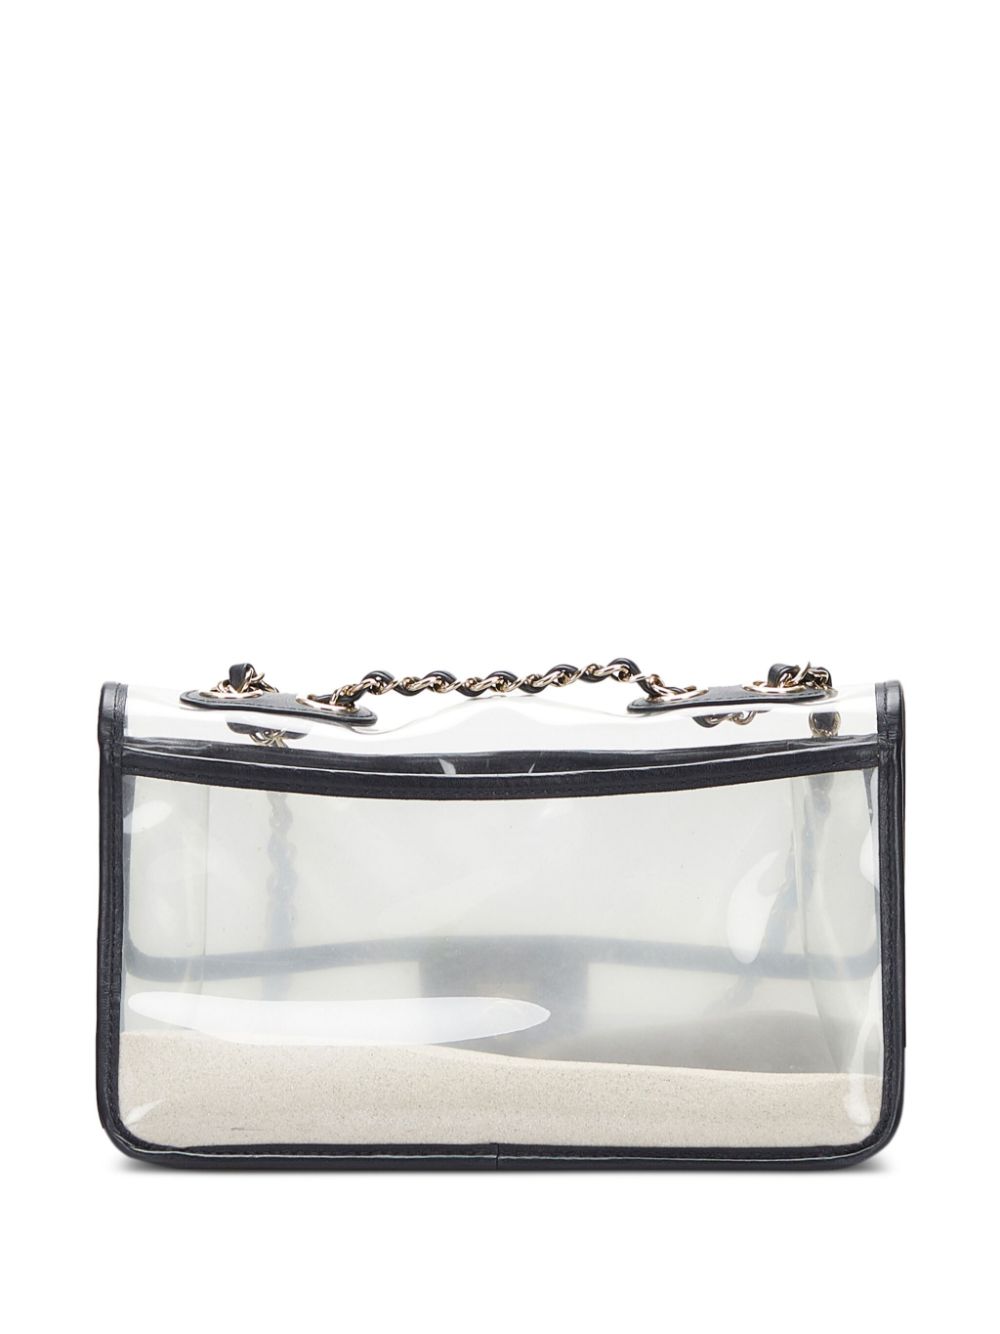 CHANEL Lambskin PVC Sand By The Sea Flap With Pearl Strap Black